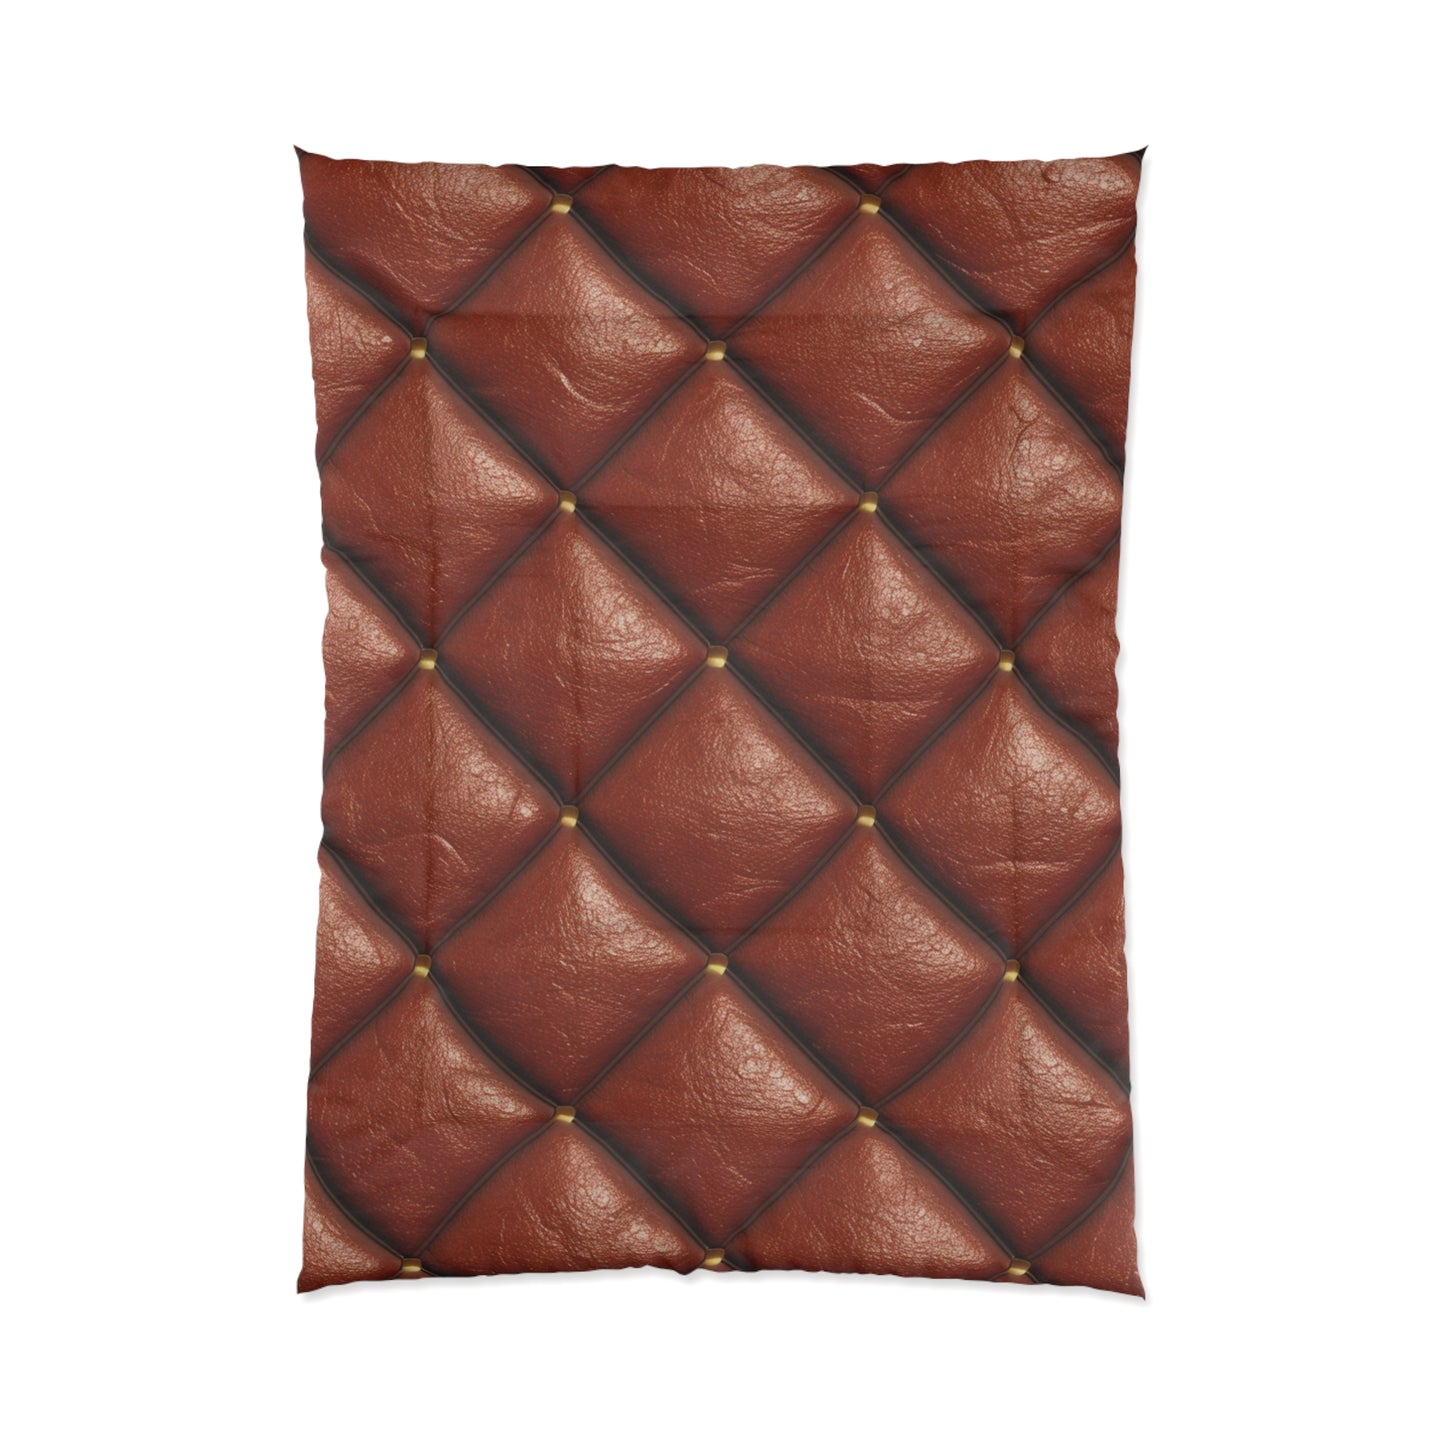 Brown Leather Cognac Pattern Rugged Durable Design Style - Bed Comforter